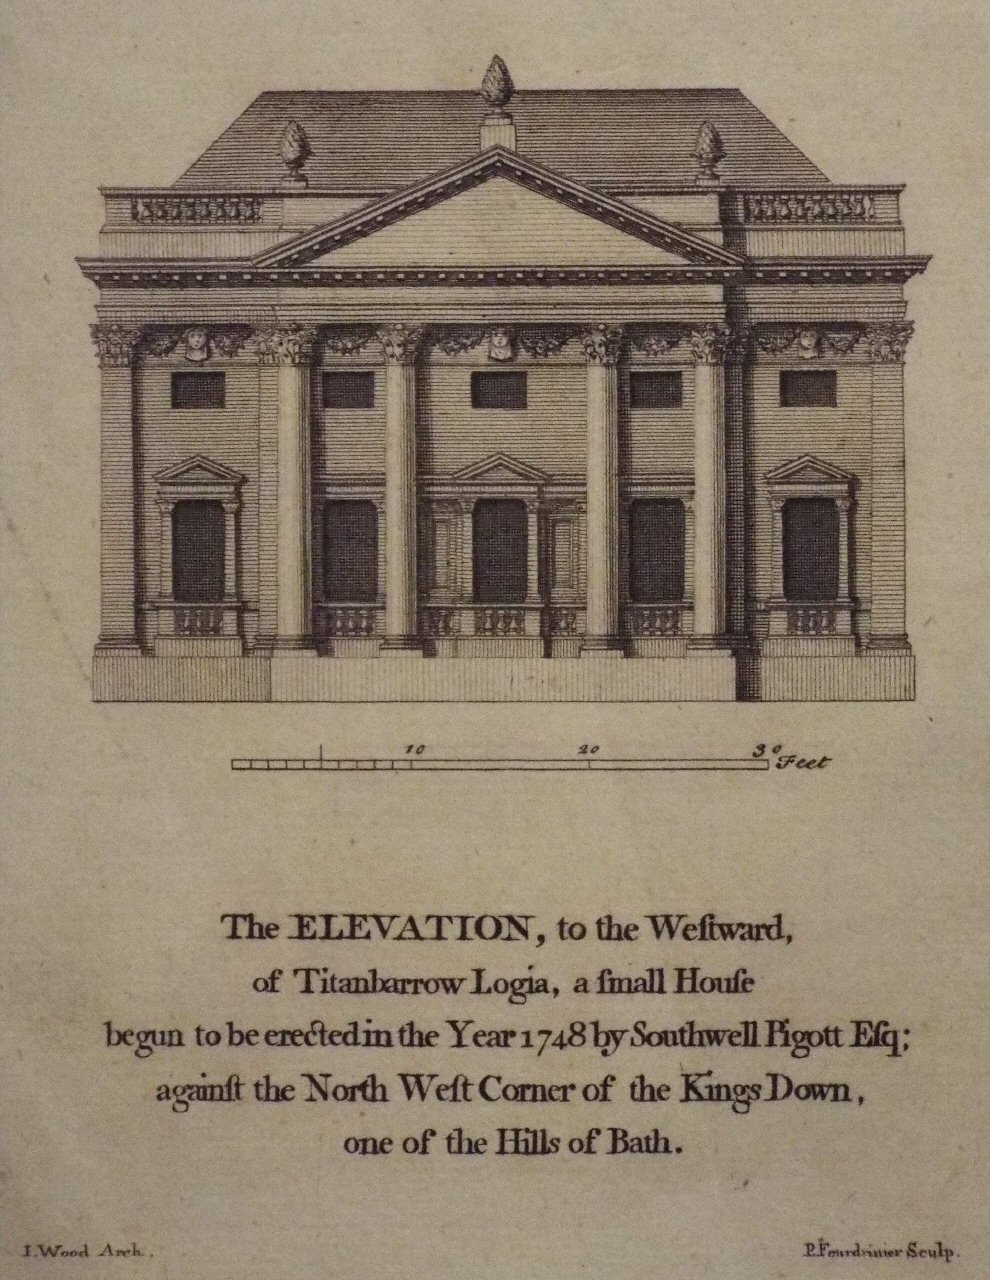 Print - Elevation, to the Westward, of Titanbarrow Logia, a small House begun to be erected in the Year 1748 by Southwell Pigott Esq: against the North West Corner of the Kings Down, one of the Hills of Bath. - Fourdrinier